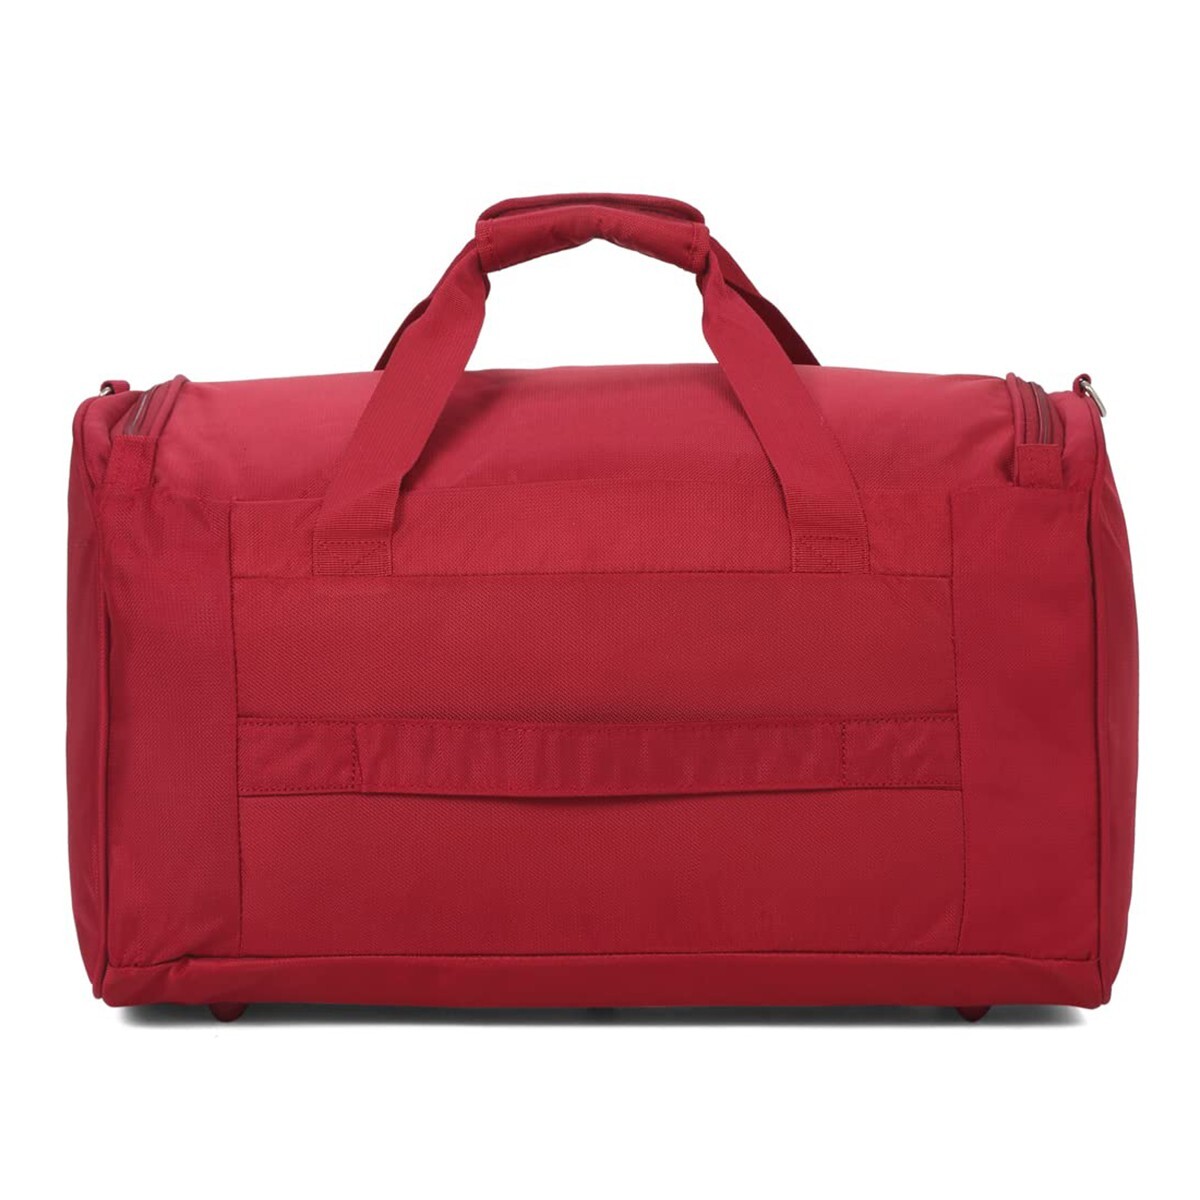 Delsey Duffle Bag Pin Up-5 50cm-Red